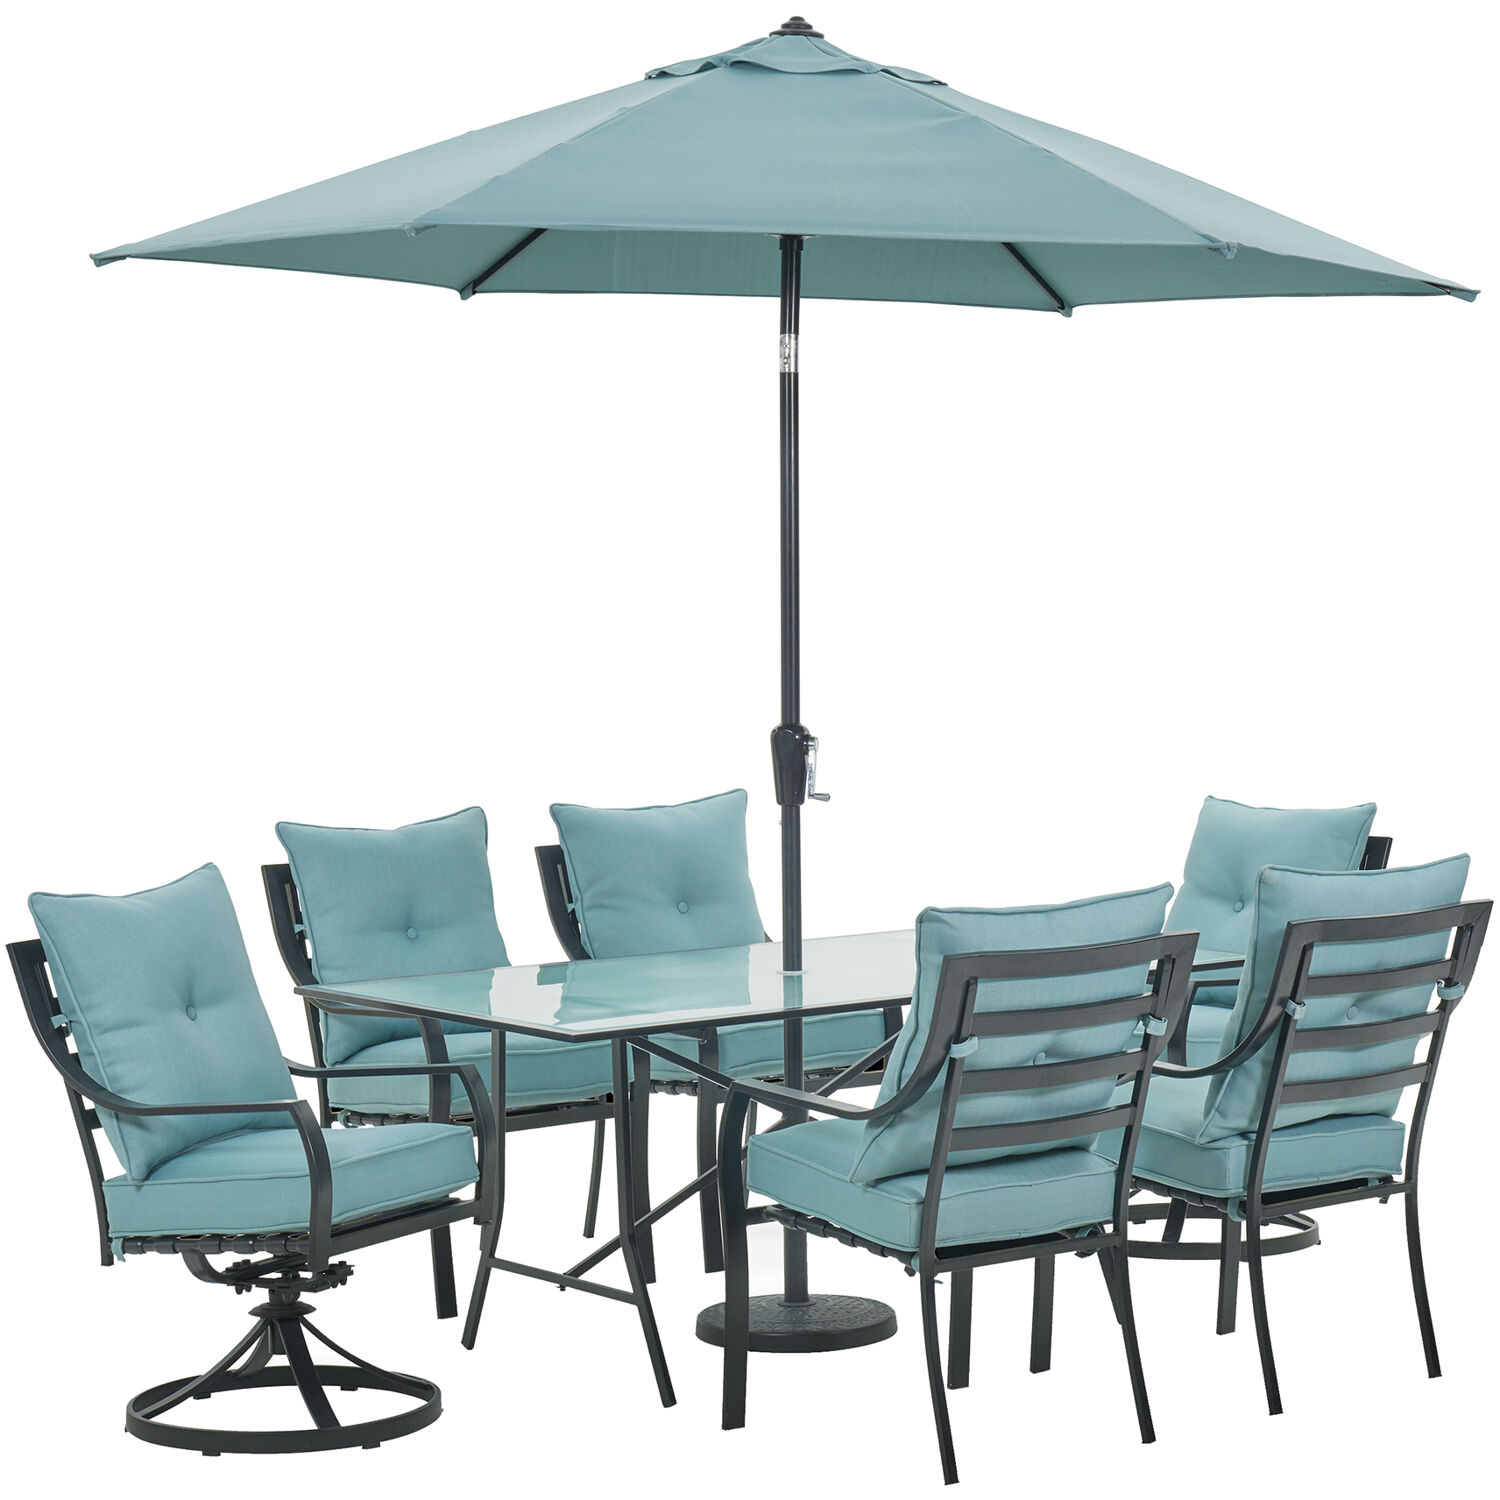 Hanover Lavallette 7-PC. Dining Set in Ocean Blue w/ 4 Chairs, 2 Swivel Rockers, 66" x 38" Glass-Top Table, Umbrella, and Base - image 1 of 15